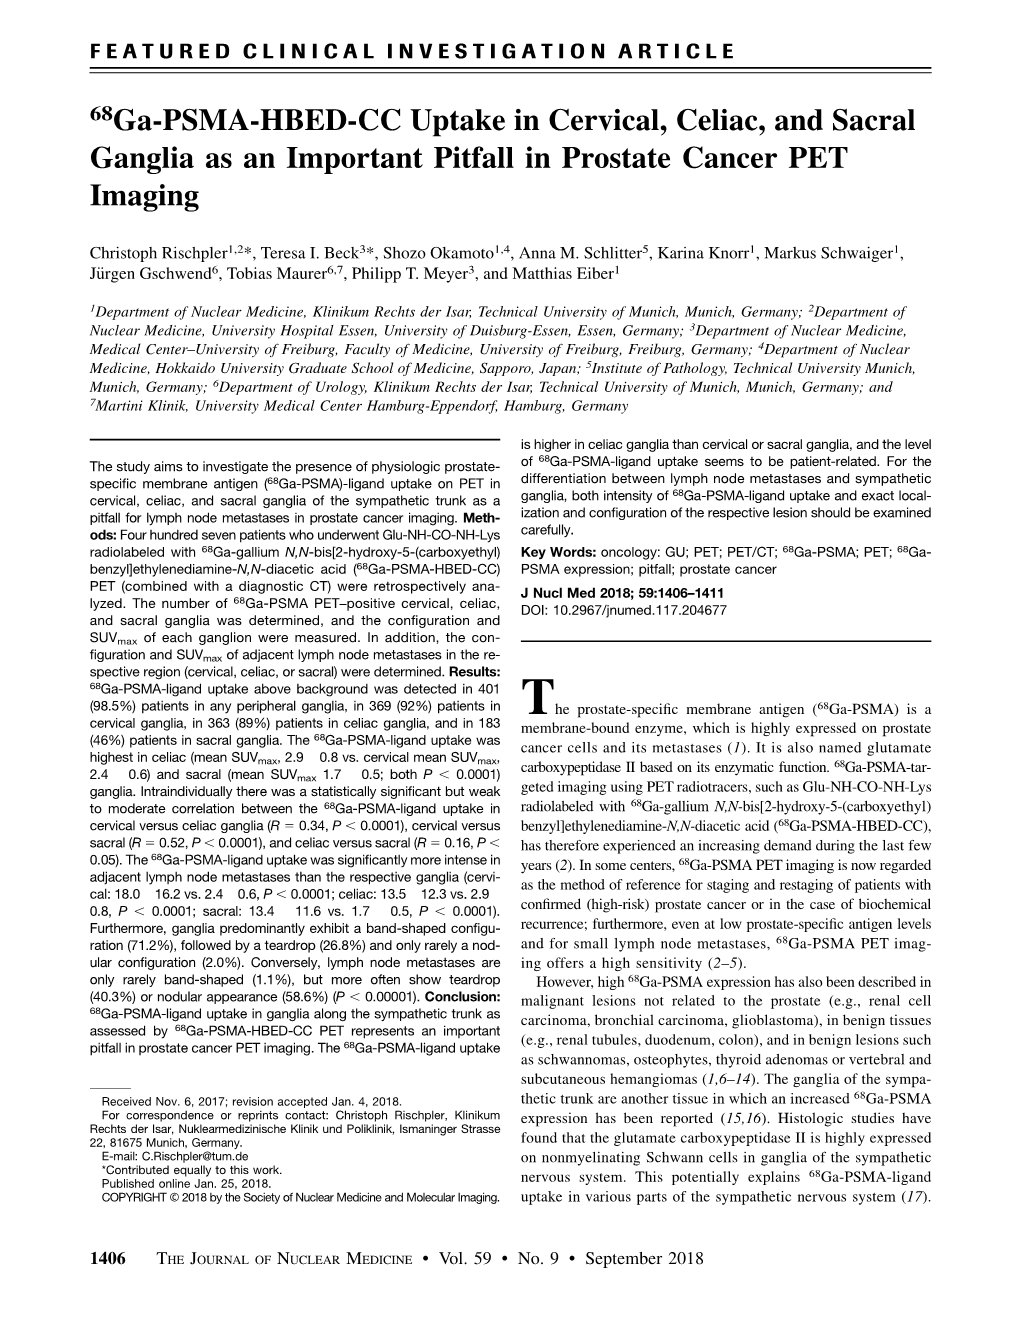 68Ga-PSMA-HBED-CC Uptake in Cervical, Celiac, and Sacral Ganglia As an Important Pitfall in Prostate Cancer PET Imaging